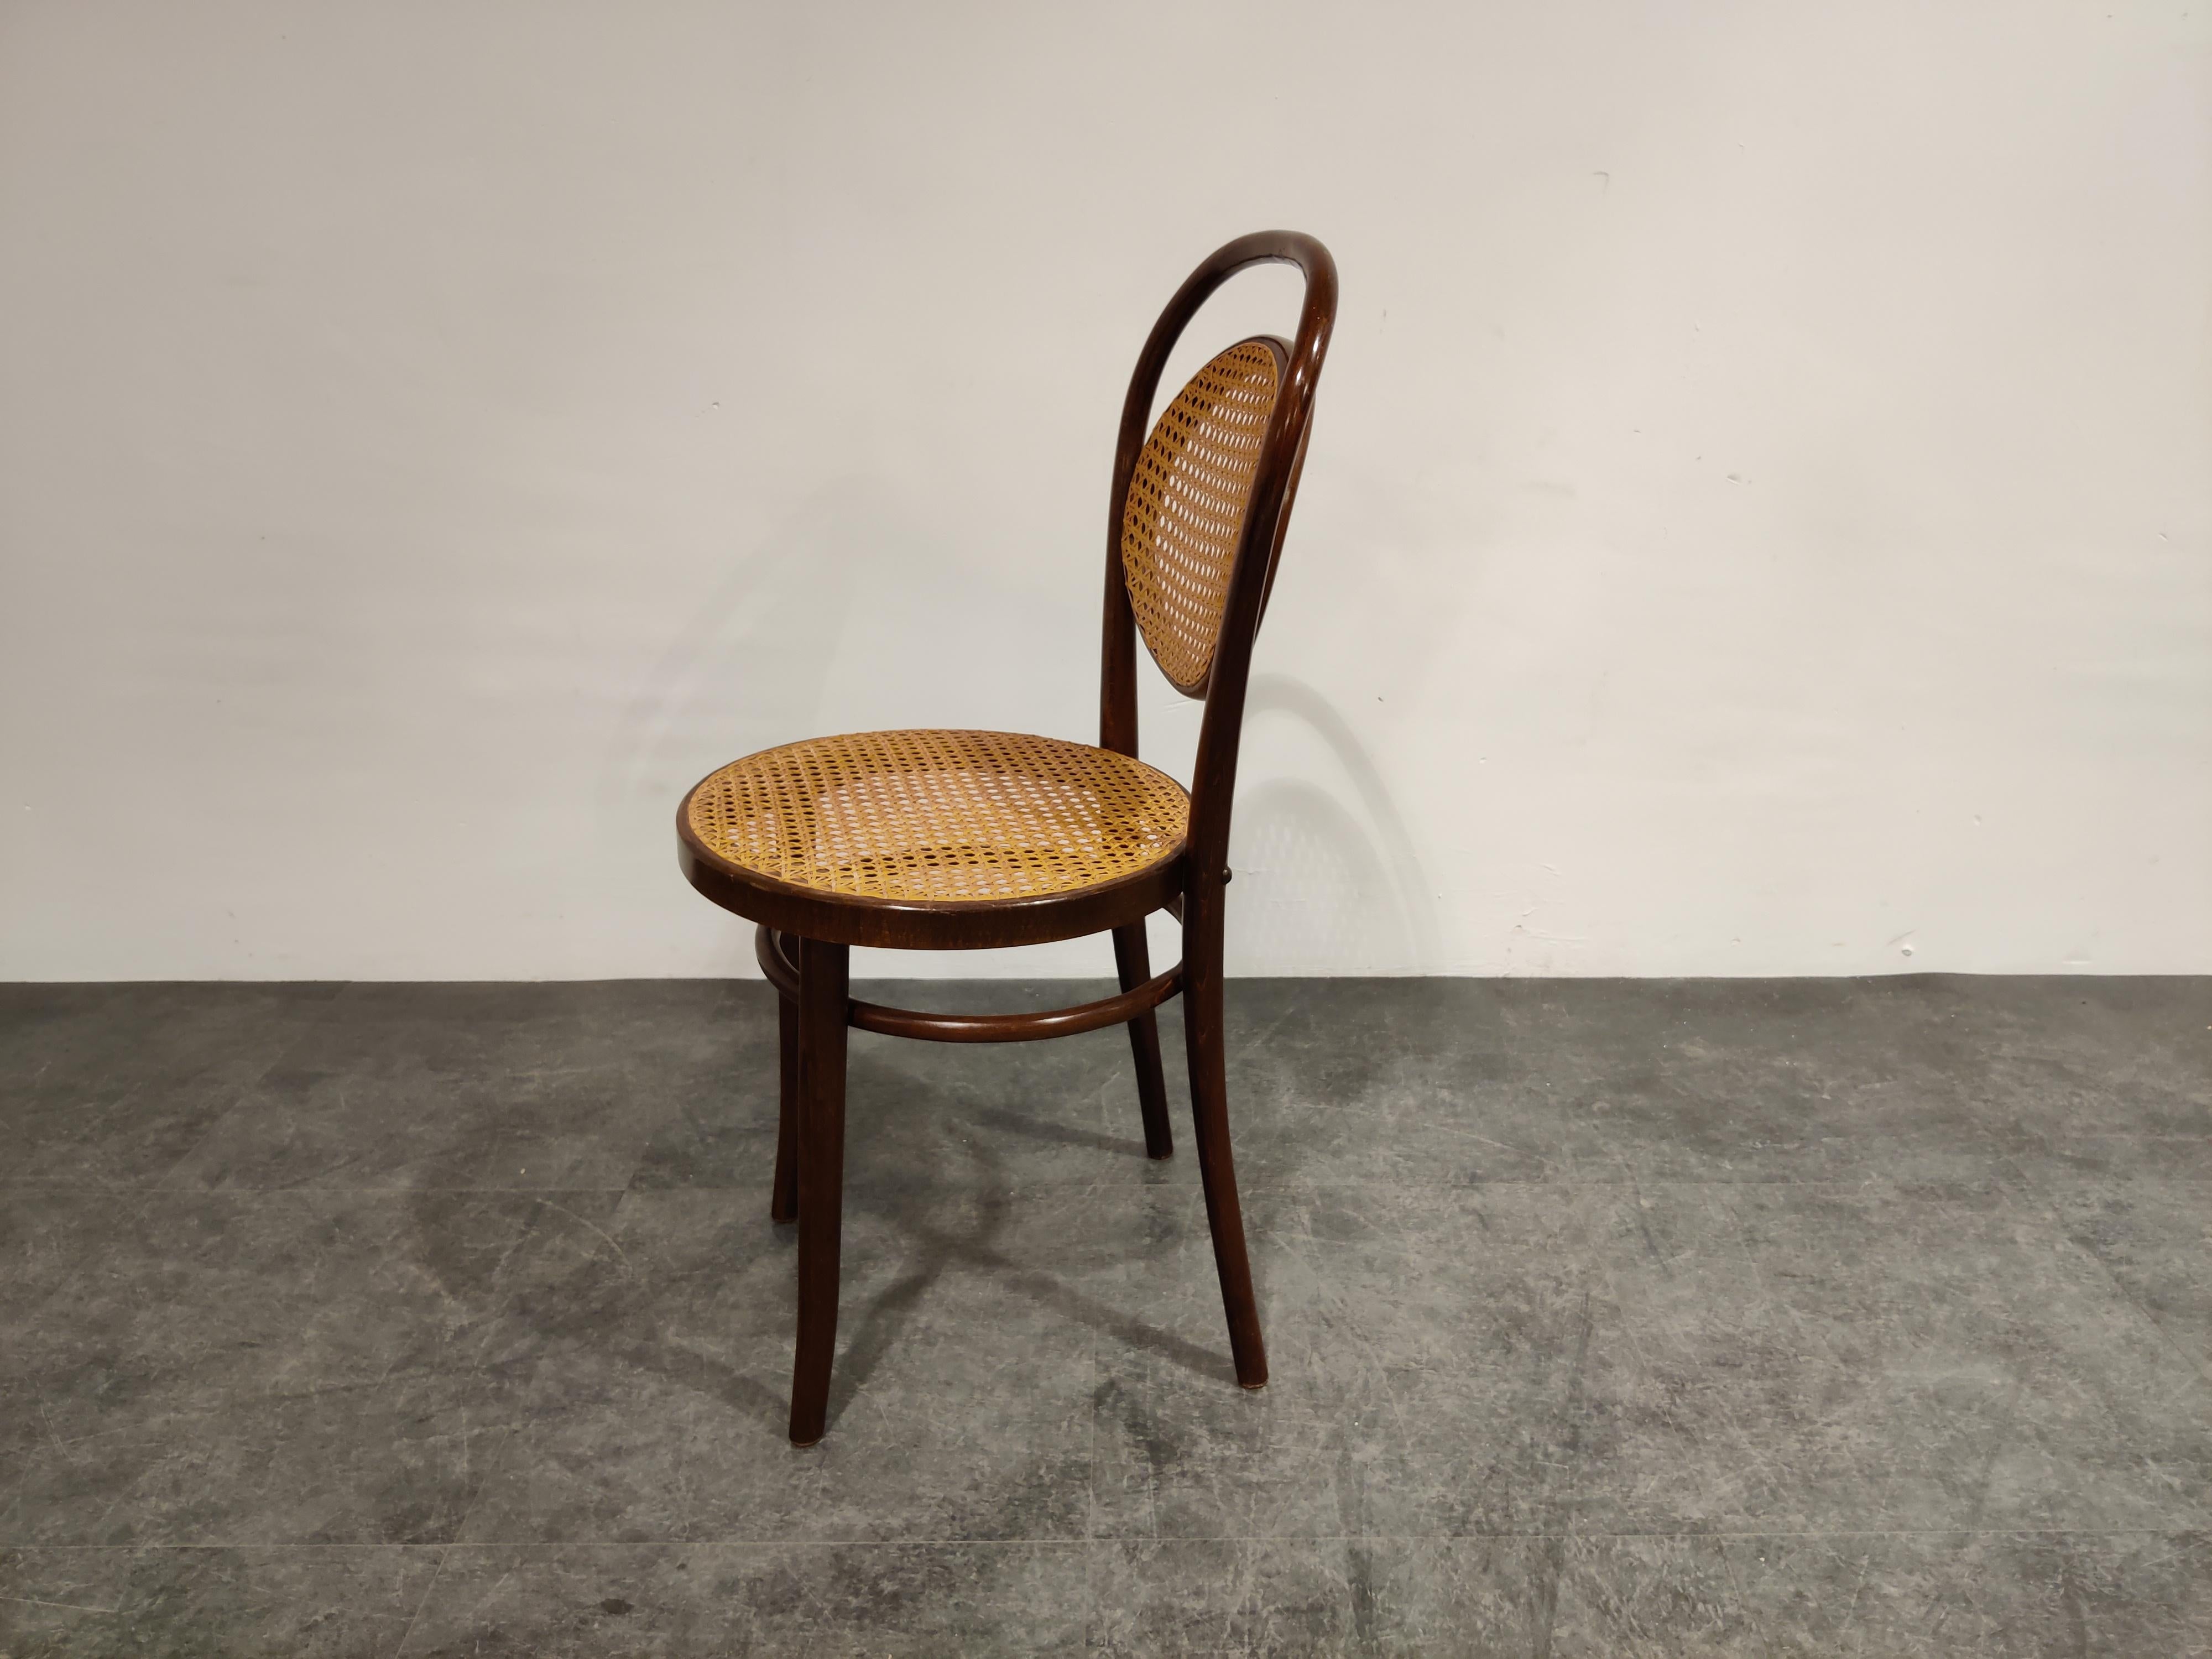 Romanian Antique Bentwood Dining Chair or Bistro Chair, 1950s